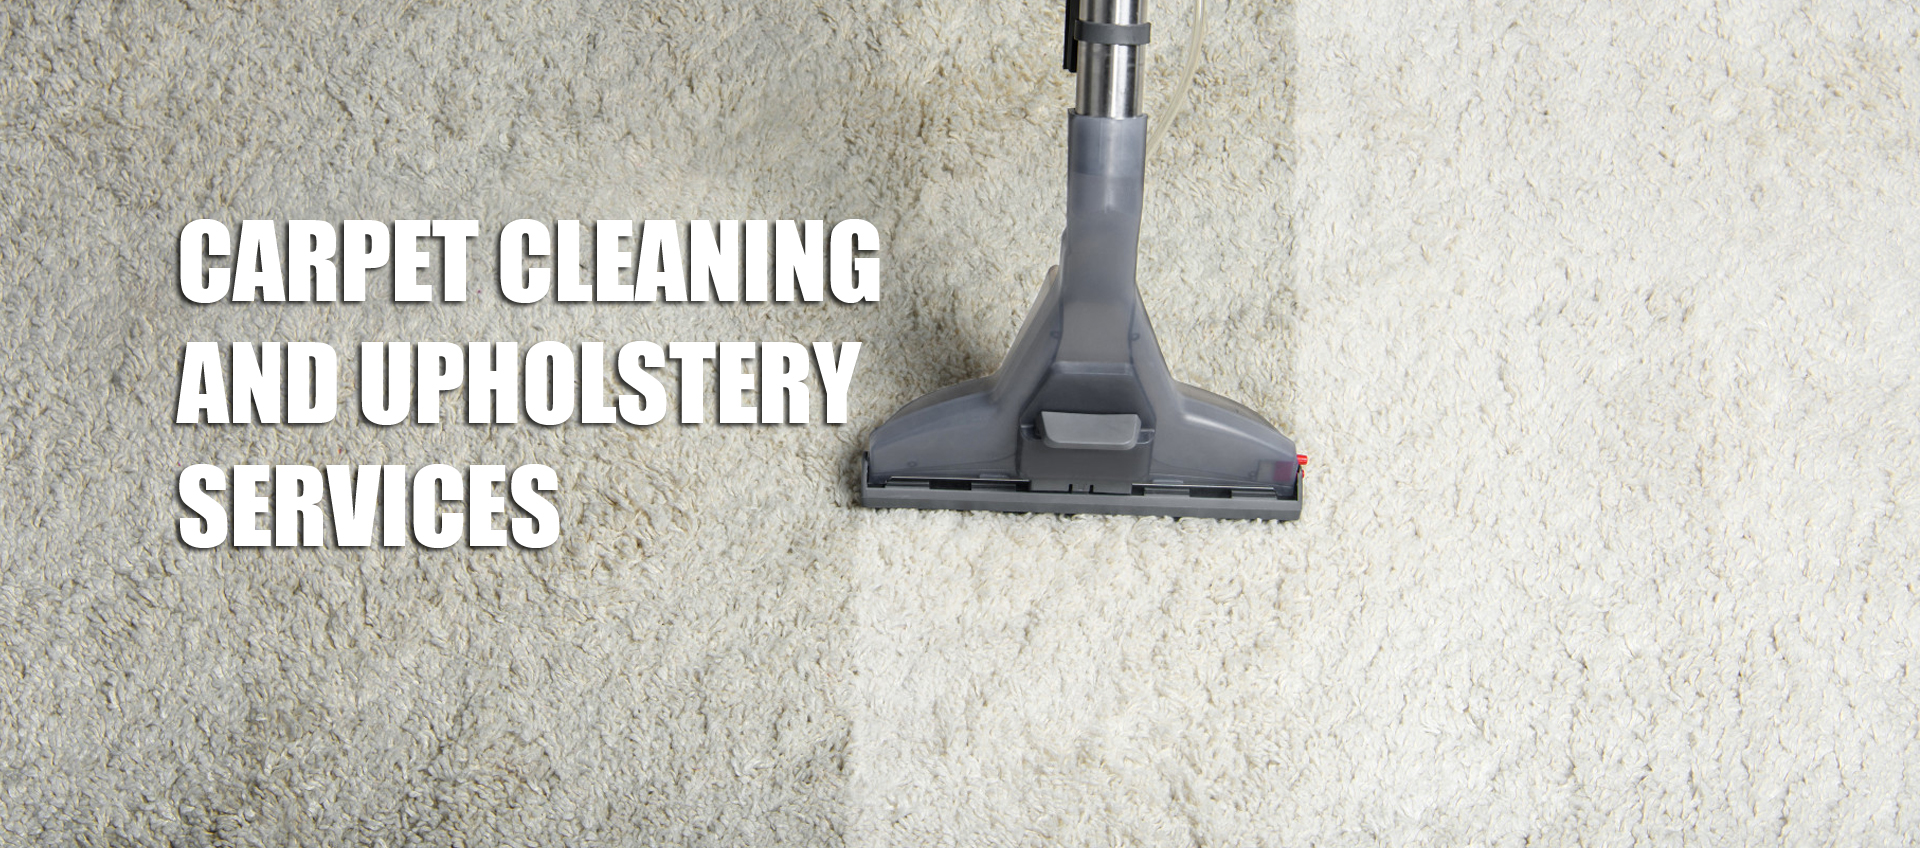 Revitalize Your Home with Expert Carpet Cleaning Services in Chesapeake, VA and Virginia Beach, VA